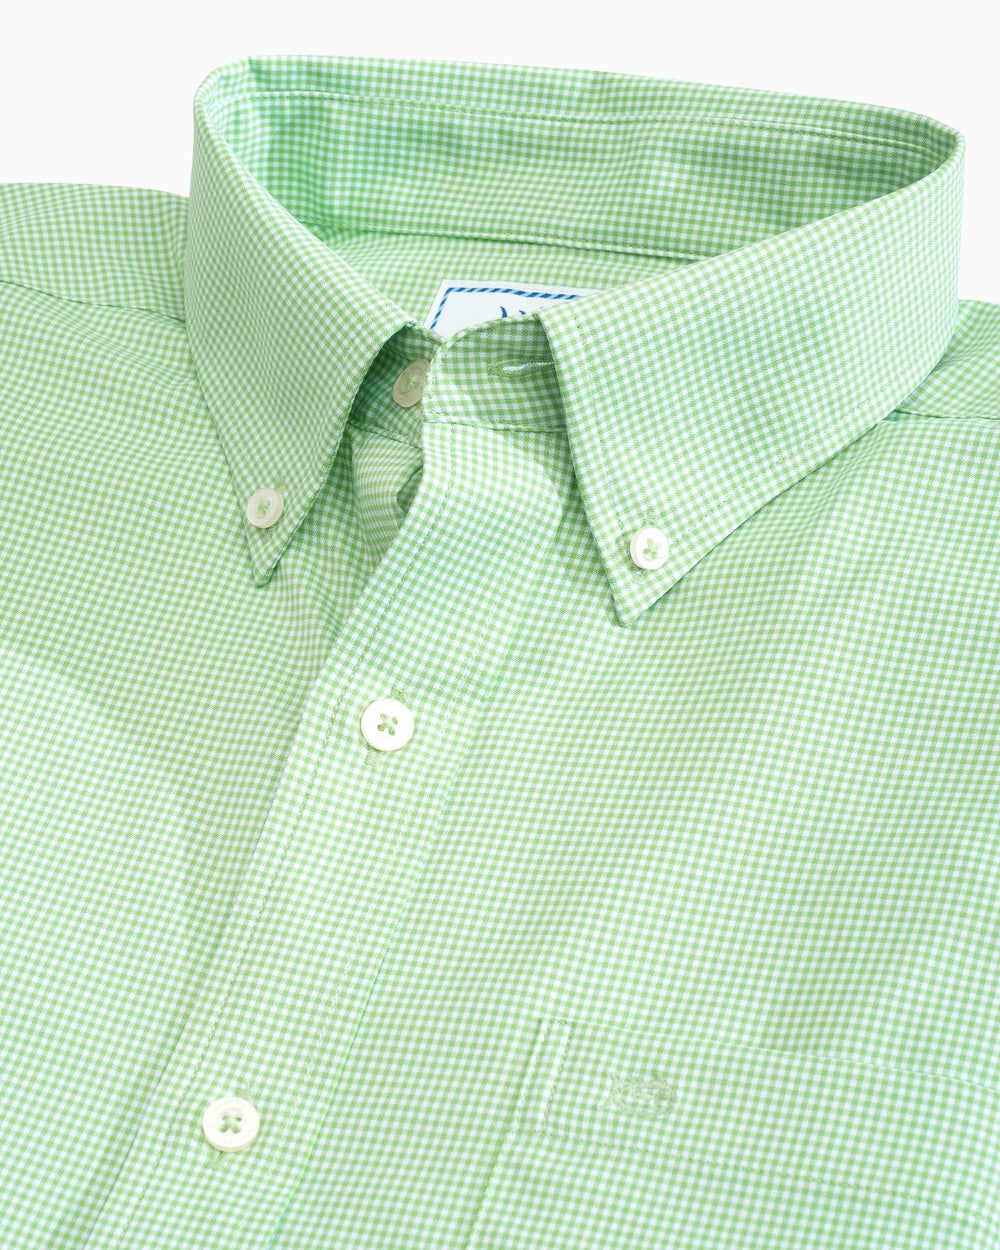 The collar of the Men's Green Micro Gingham Intercoastal Performance Sport Shirt by Southern Tide - Green Tea